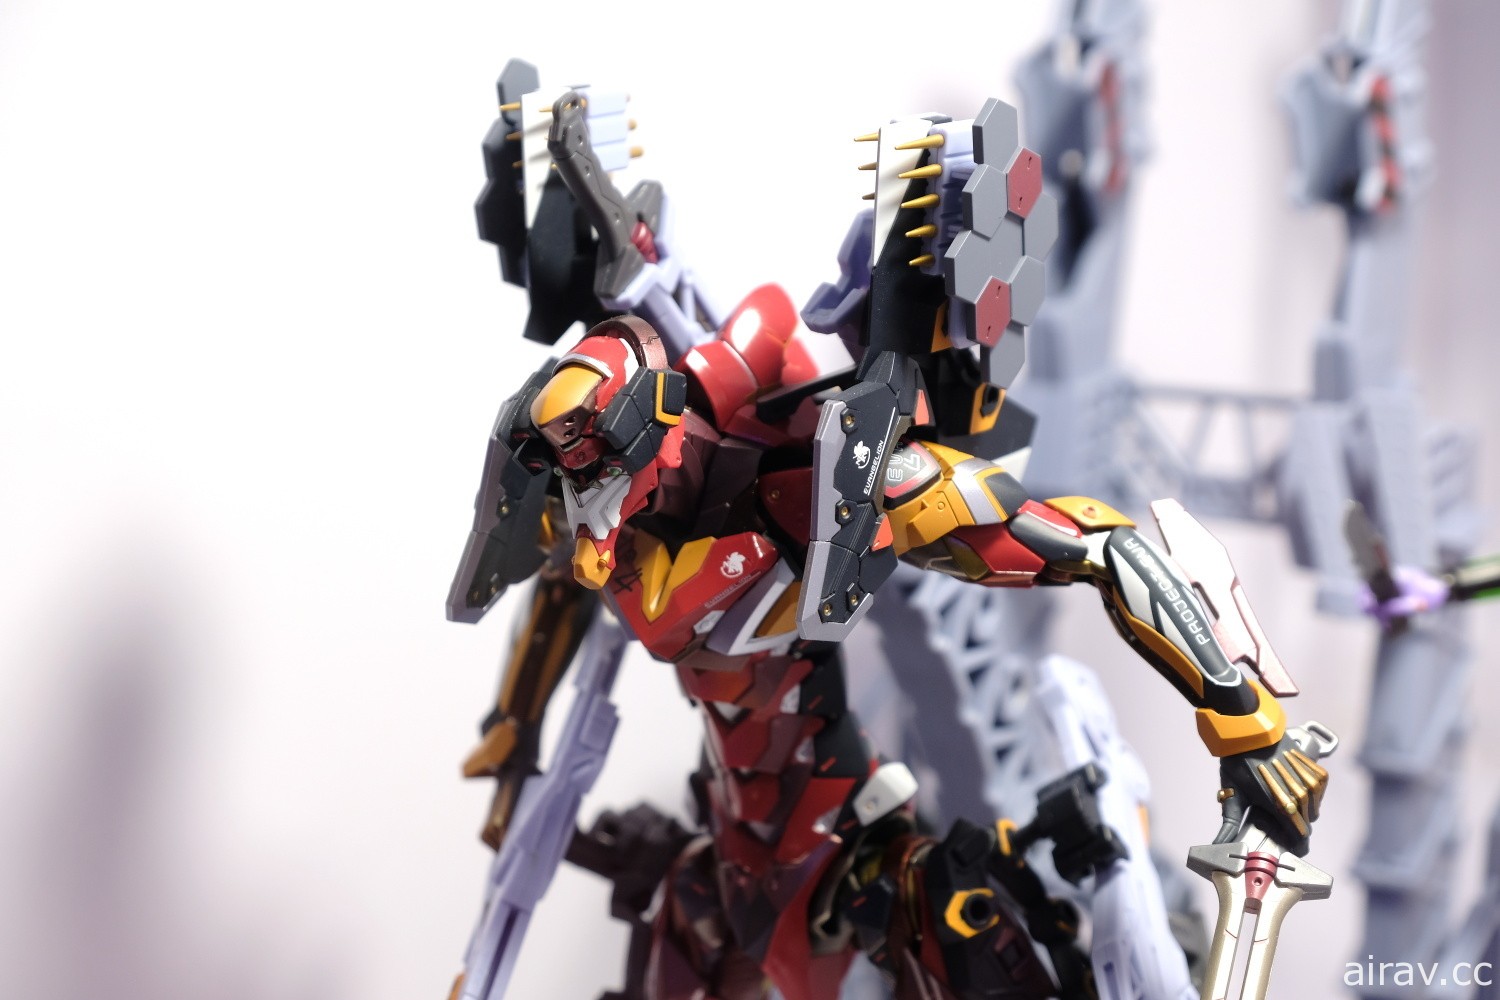 TAMASHII Features 2020 萬代收藏玩具展 正式開展 MB 龍神丸、炎柱日輪刀現場展示中